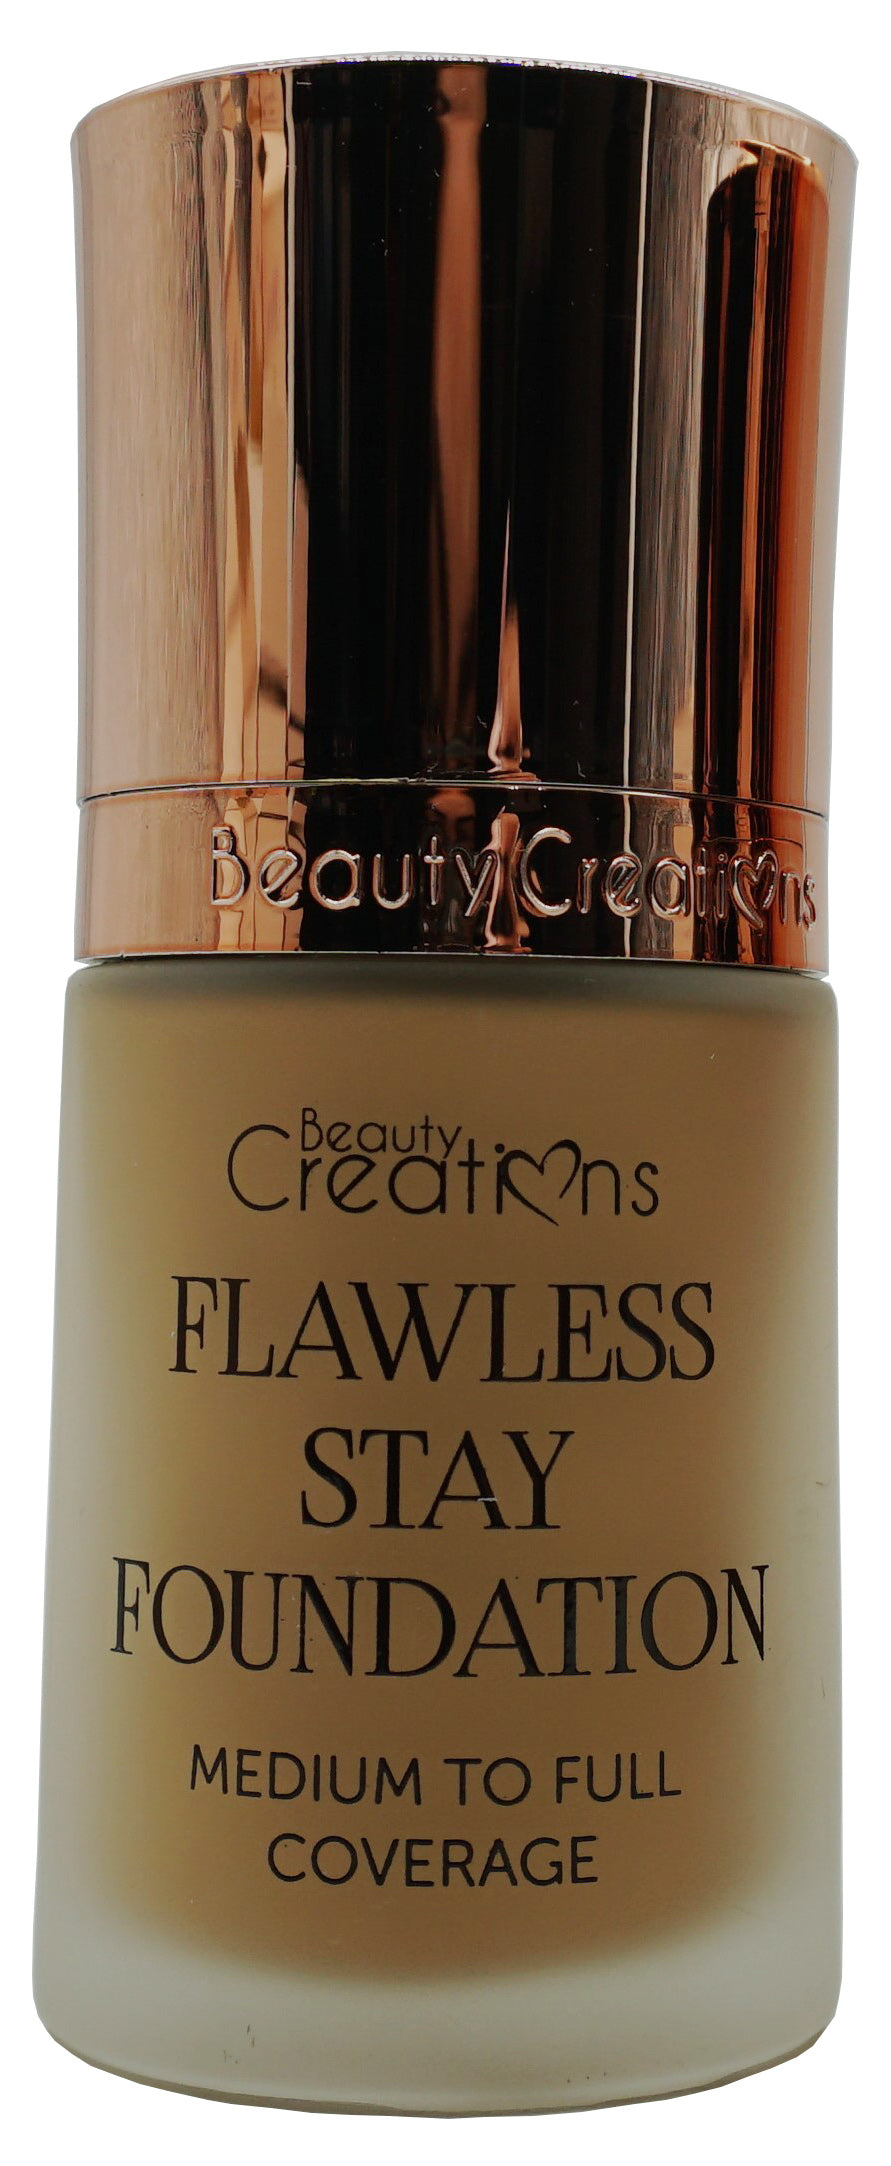 Flawless Stay Foundation by Beauty Creations